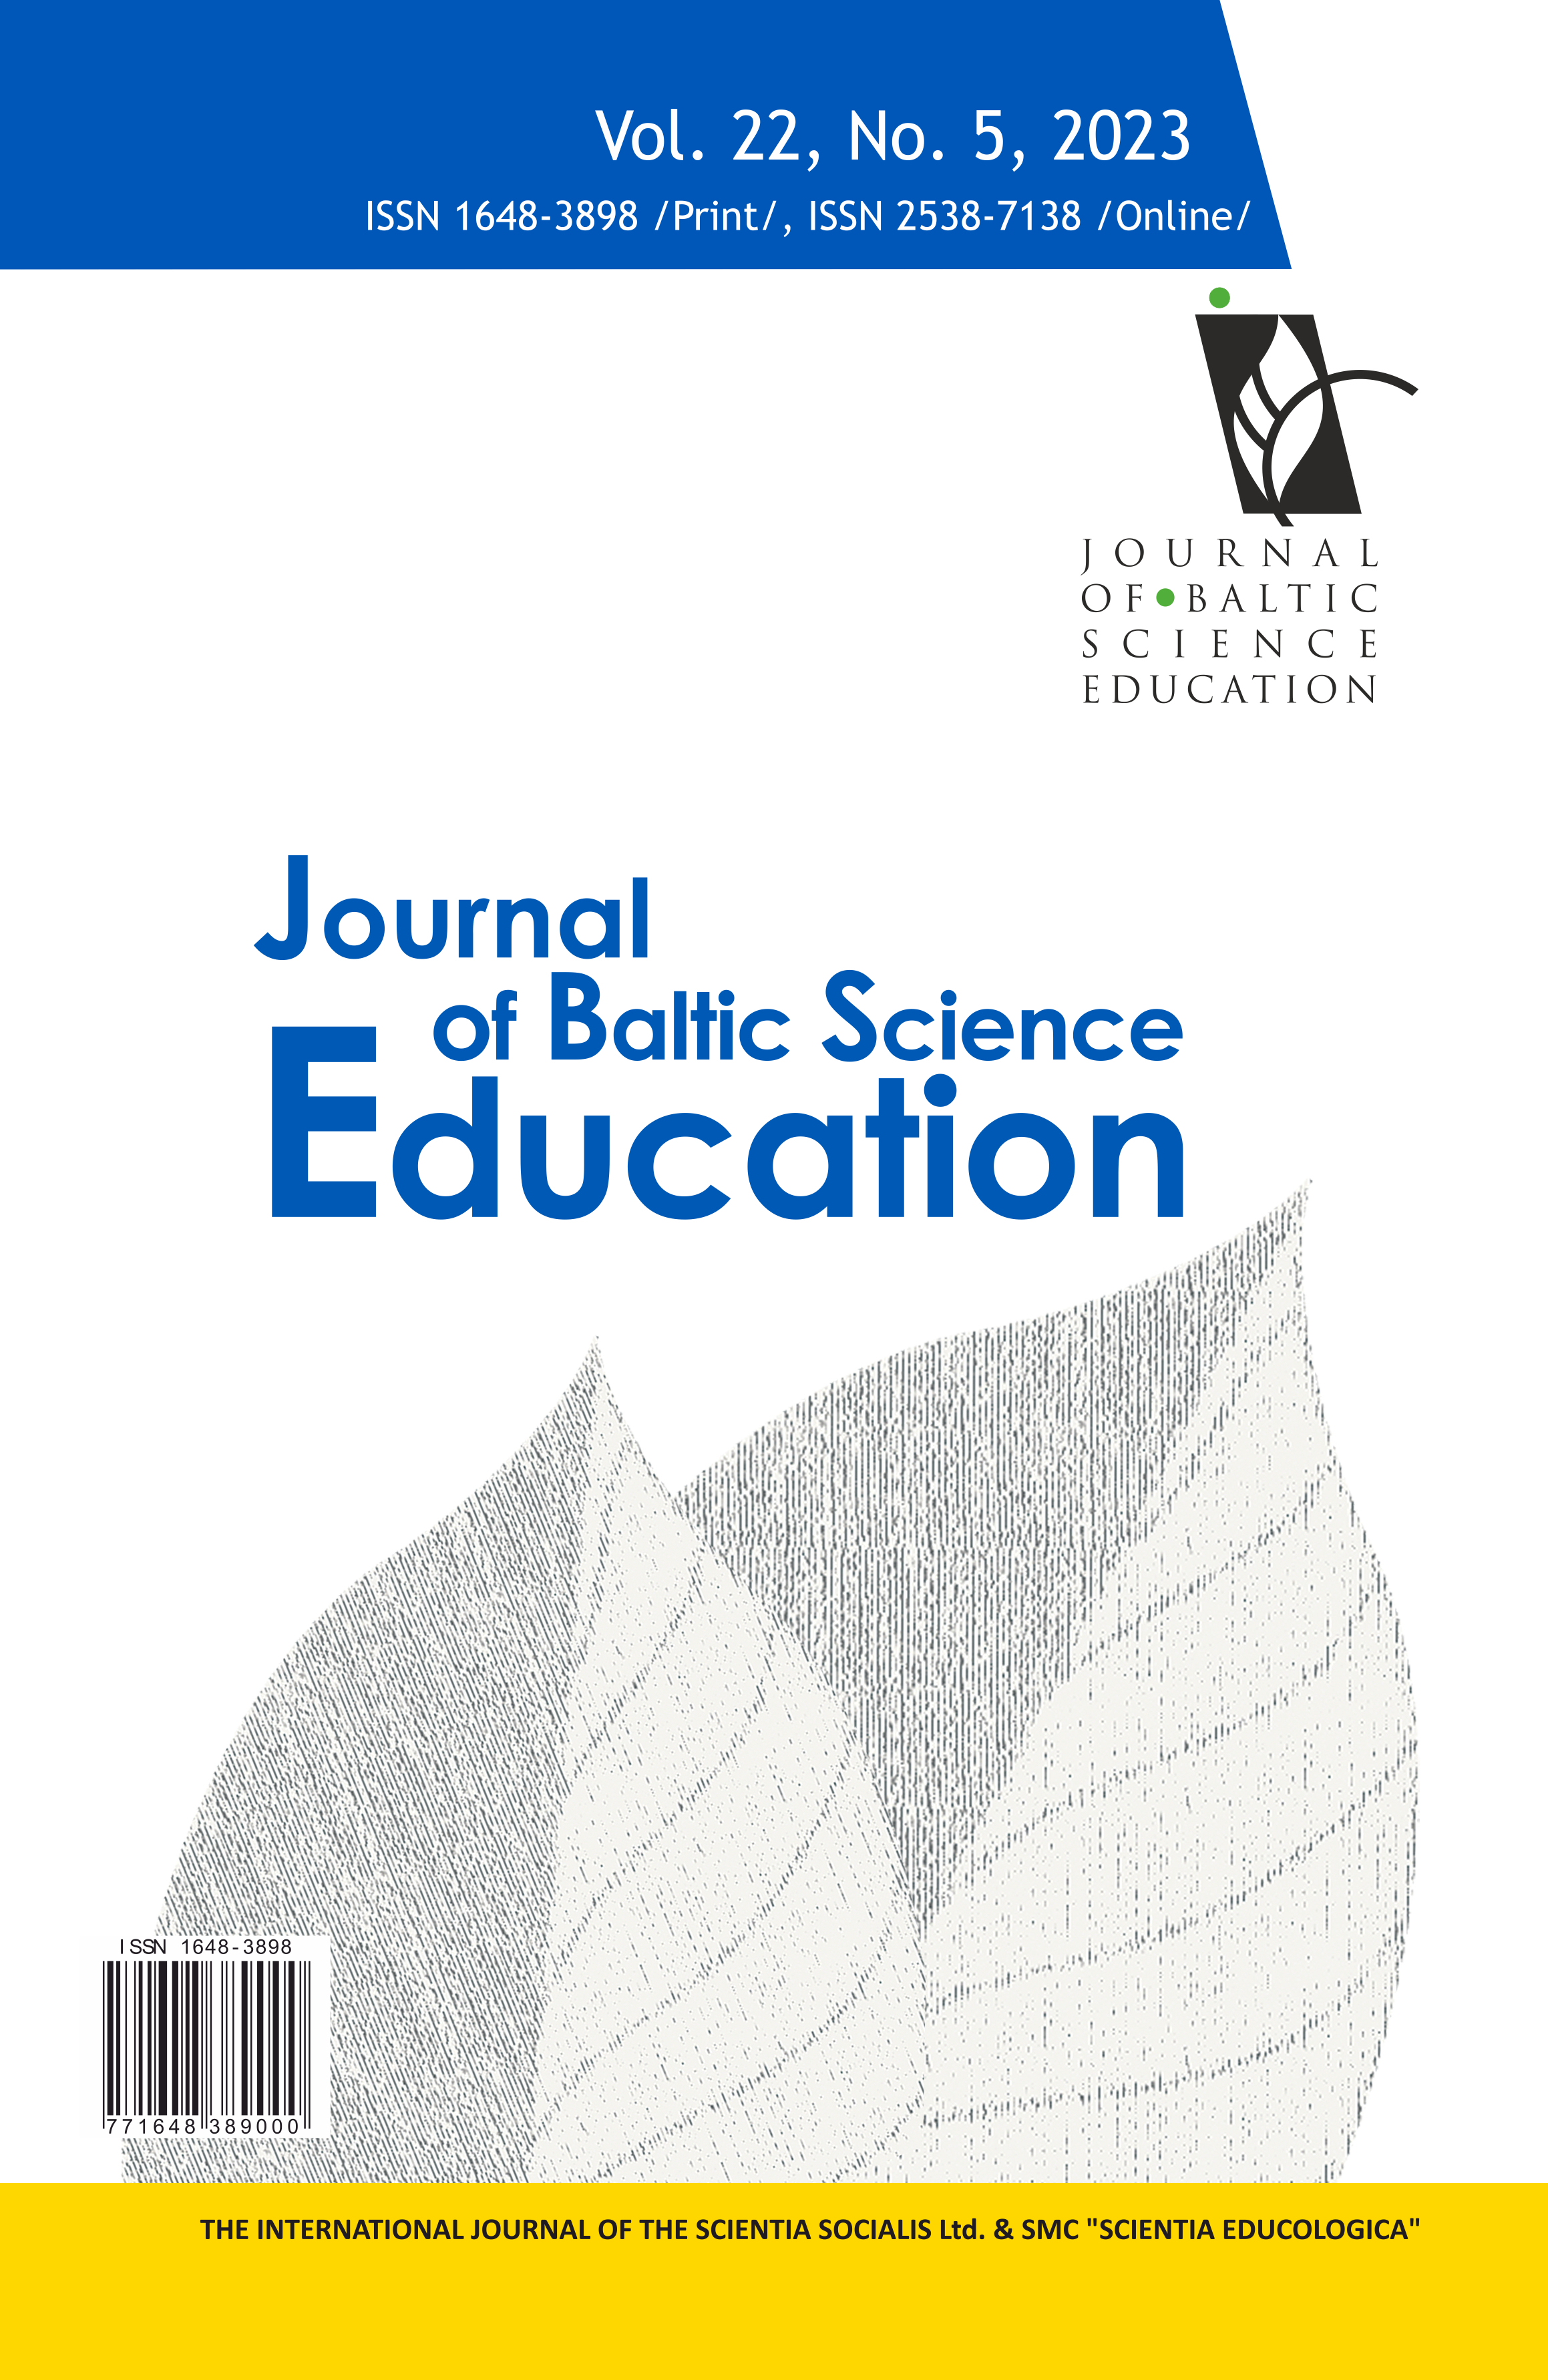 EXPLORING LOWER-SECONDARY SCHOOL STUDENTS’ SYSTEMS THINKING PERFORMANCE IN ECOLOGICAL ISSUES